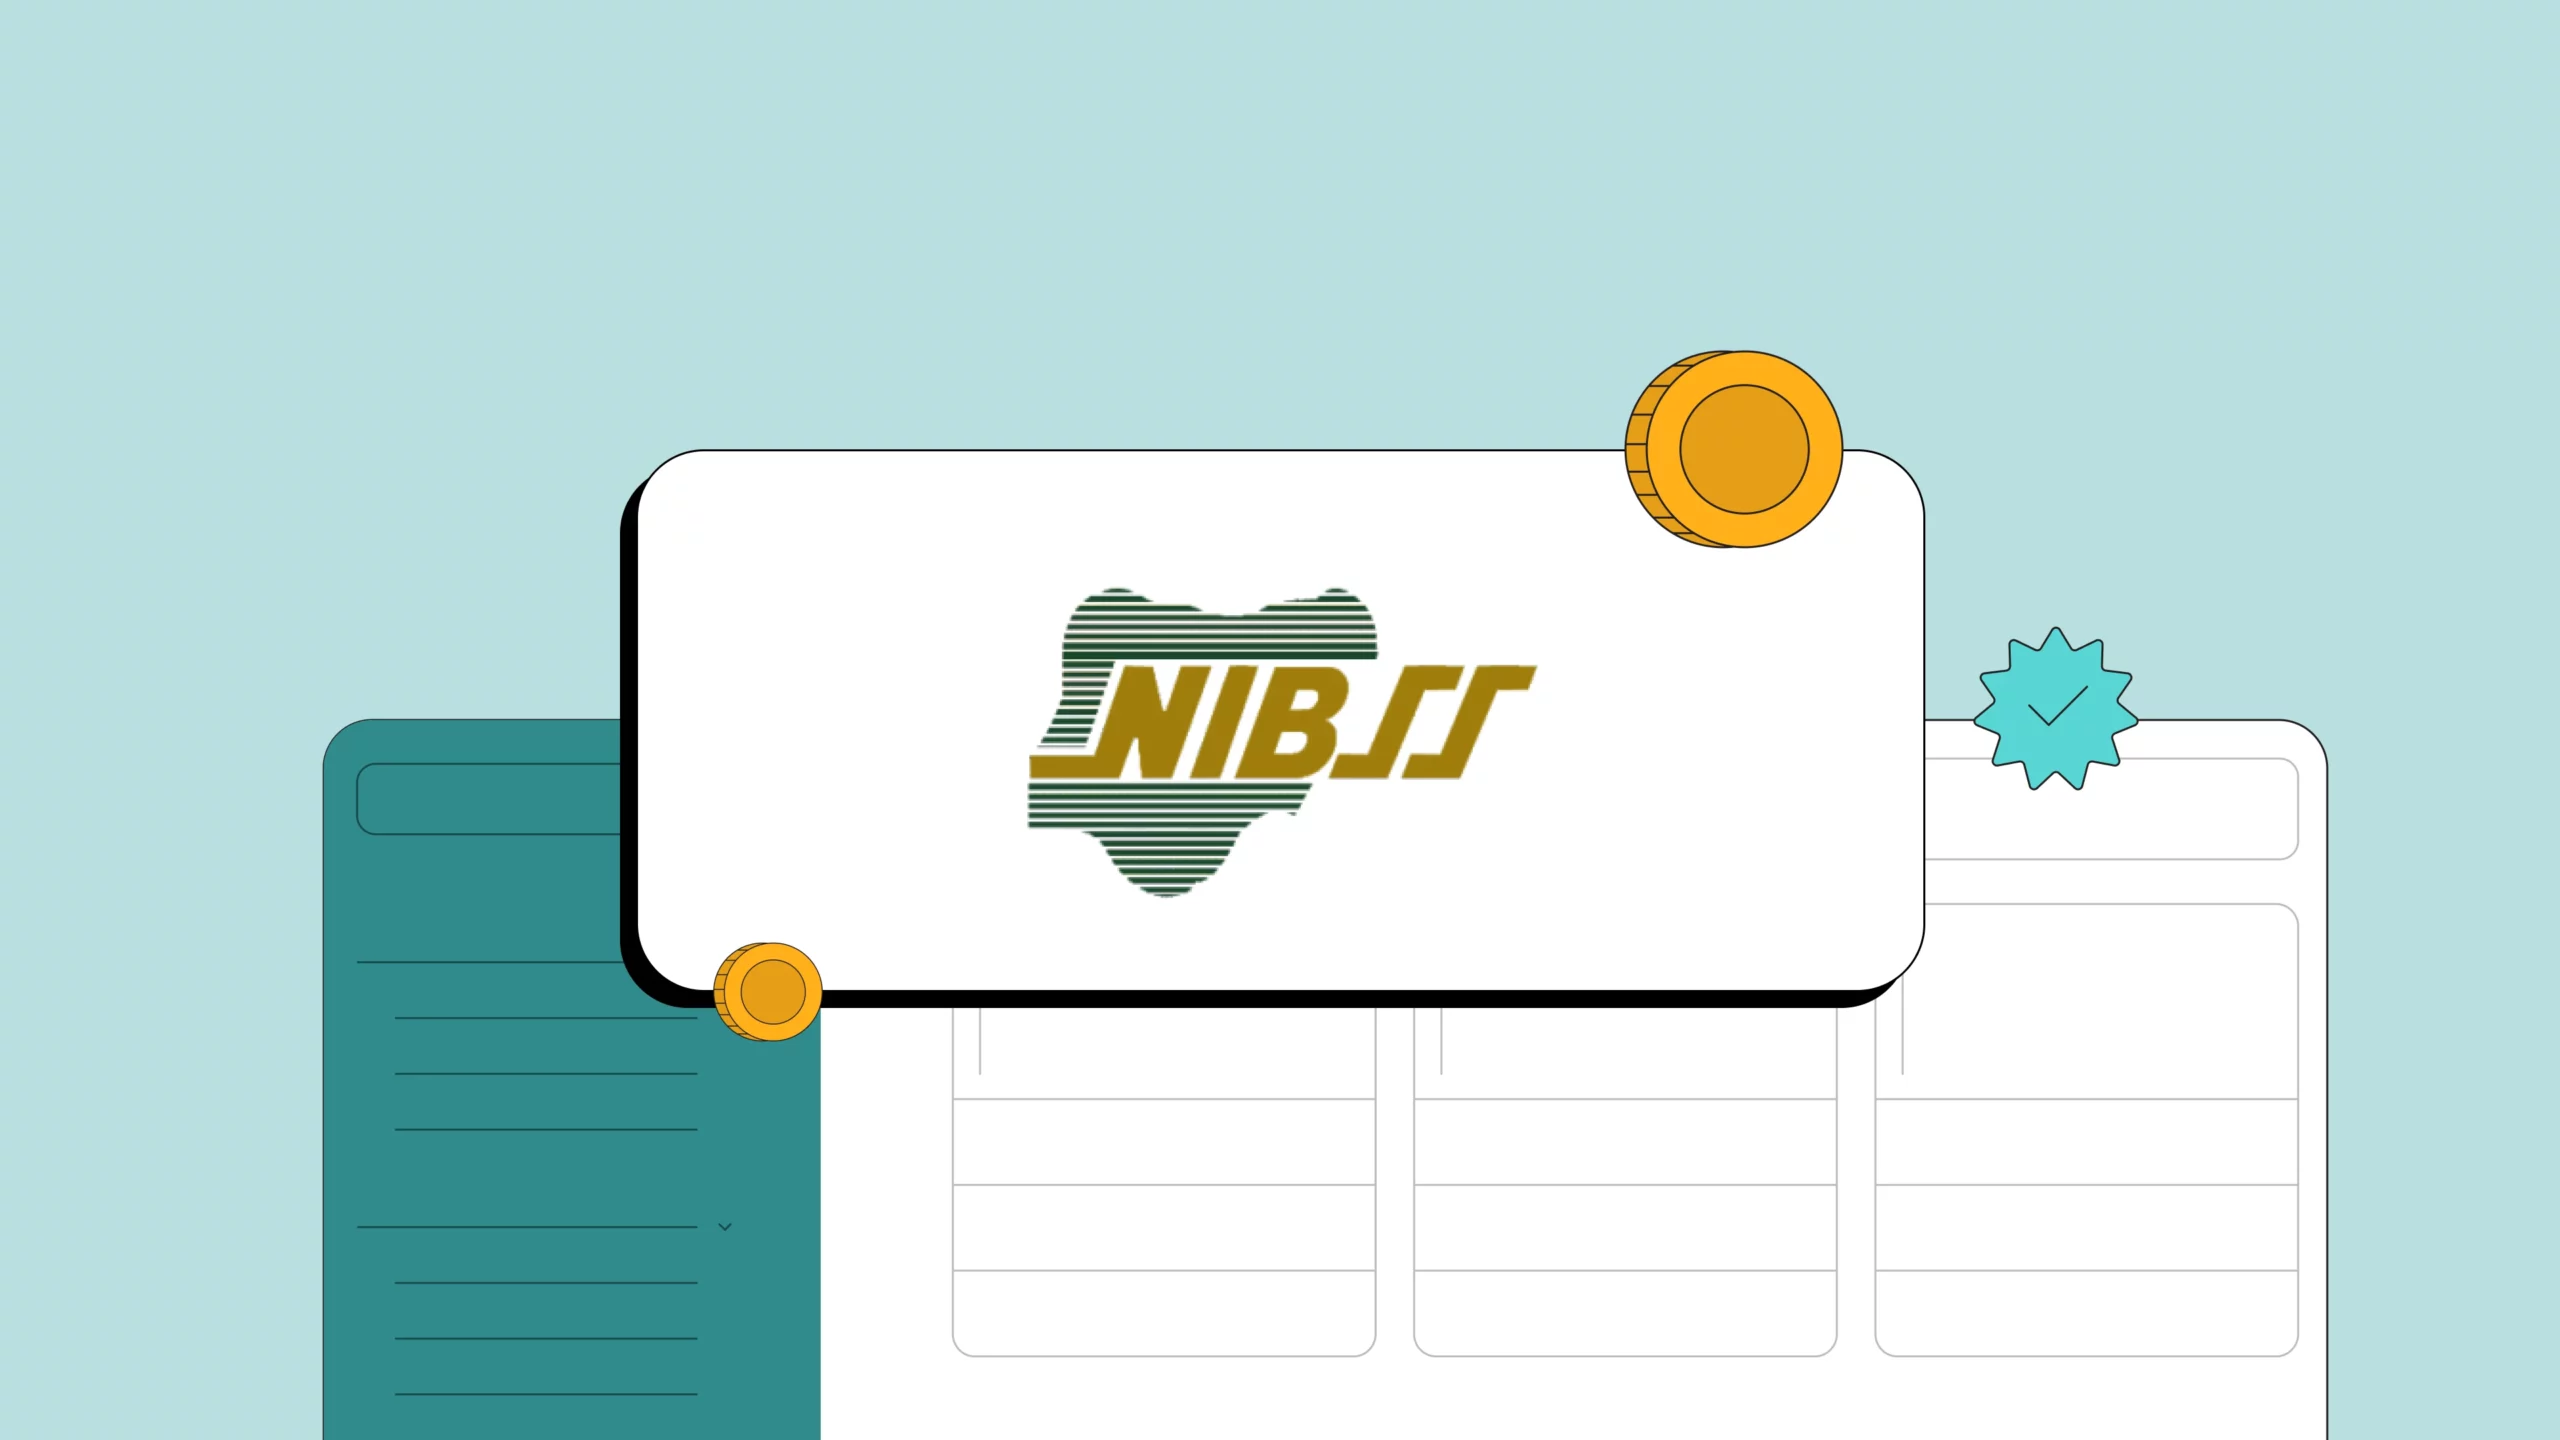 How to use NIBSS with Lendsqr for loan repayments